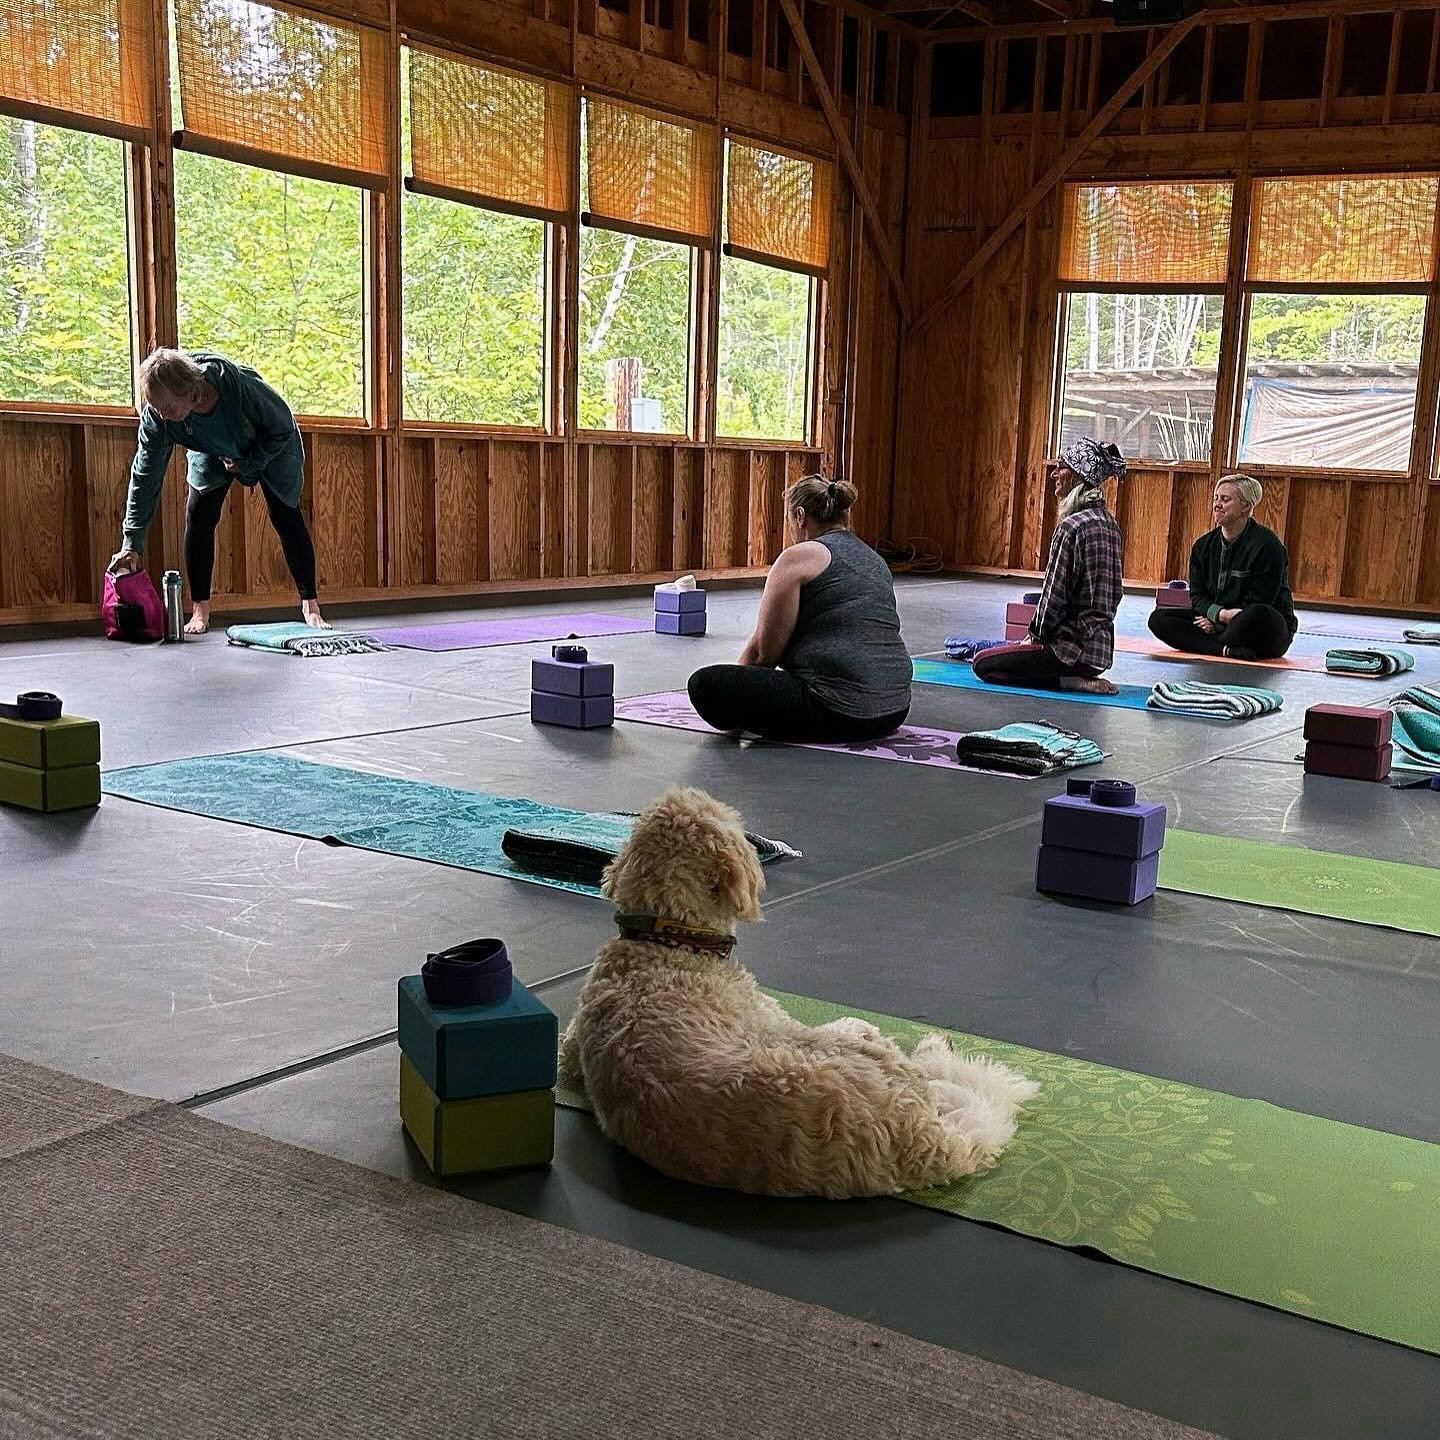 It&rsquo;s (almost) yoga time!! Join us for weekly classes at the lake starting June 13th! ✨

Take classes at your own pace and pay as you go - or purchase a class pass ahead of time!

Get yours now at toftelake.org/yoga 🌸🧘🏻&zwj;♀️

#toftelakecent